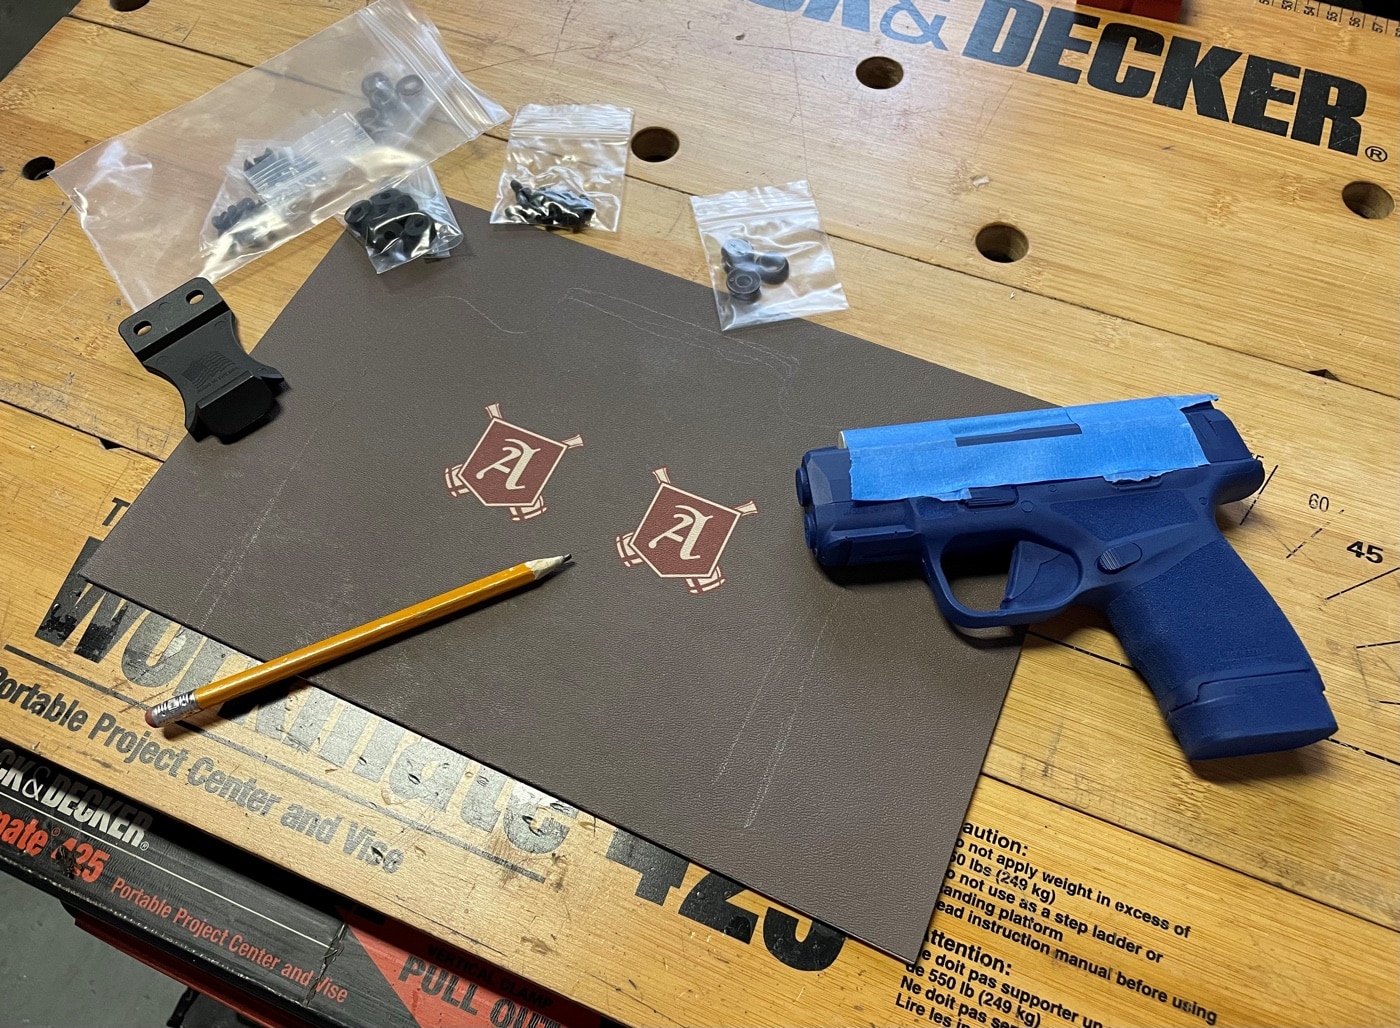 In this photo, the author shows us all of the parts he used to make a Kydex CCW rig for his Springfield Armory Hellcat 9mm pistol. He shows the various screws and attachment hardware, belt clips and Kydex sheeting. If you want to learn how to make your own holster, be sure to take your time to get it right. The finished product will definitely be worth it. The first step is to make sure you have all of your parts.